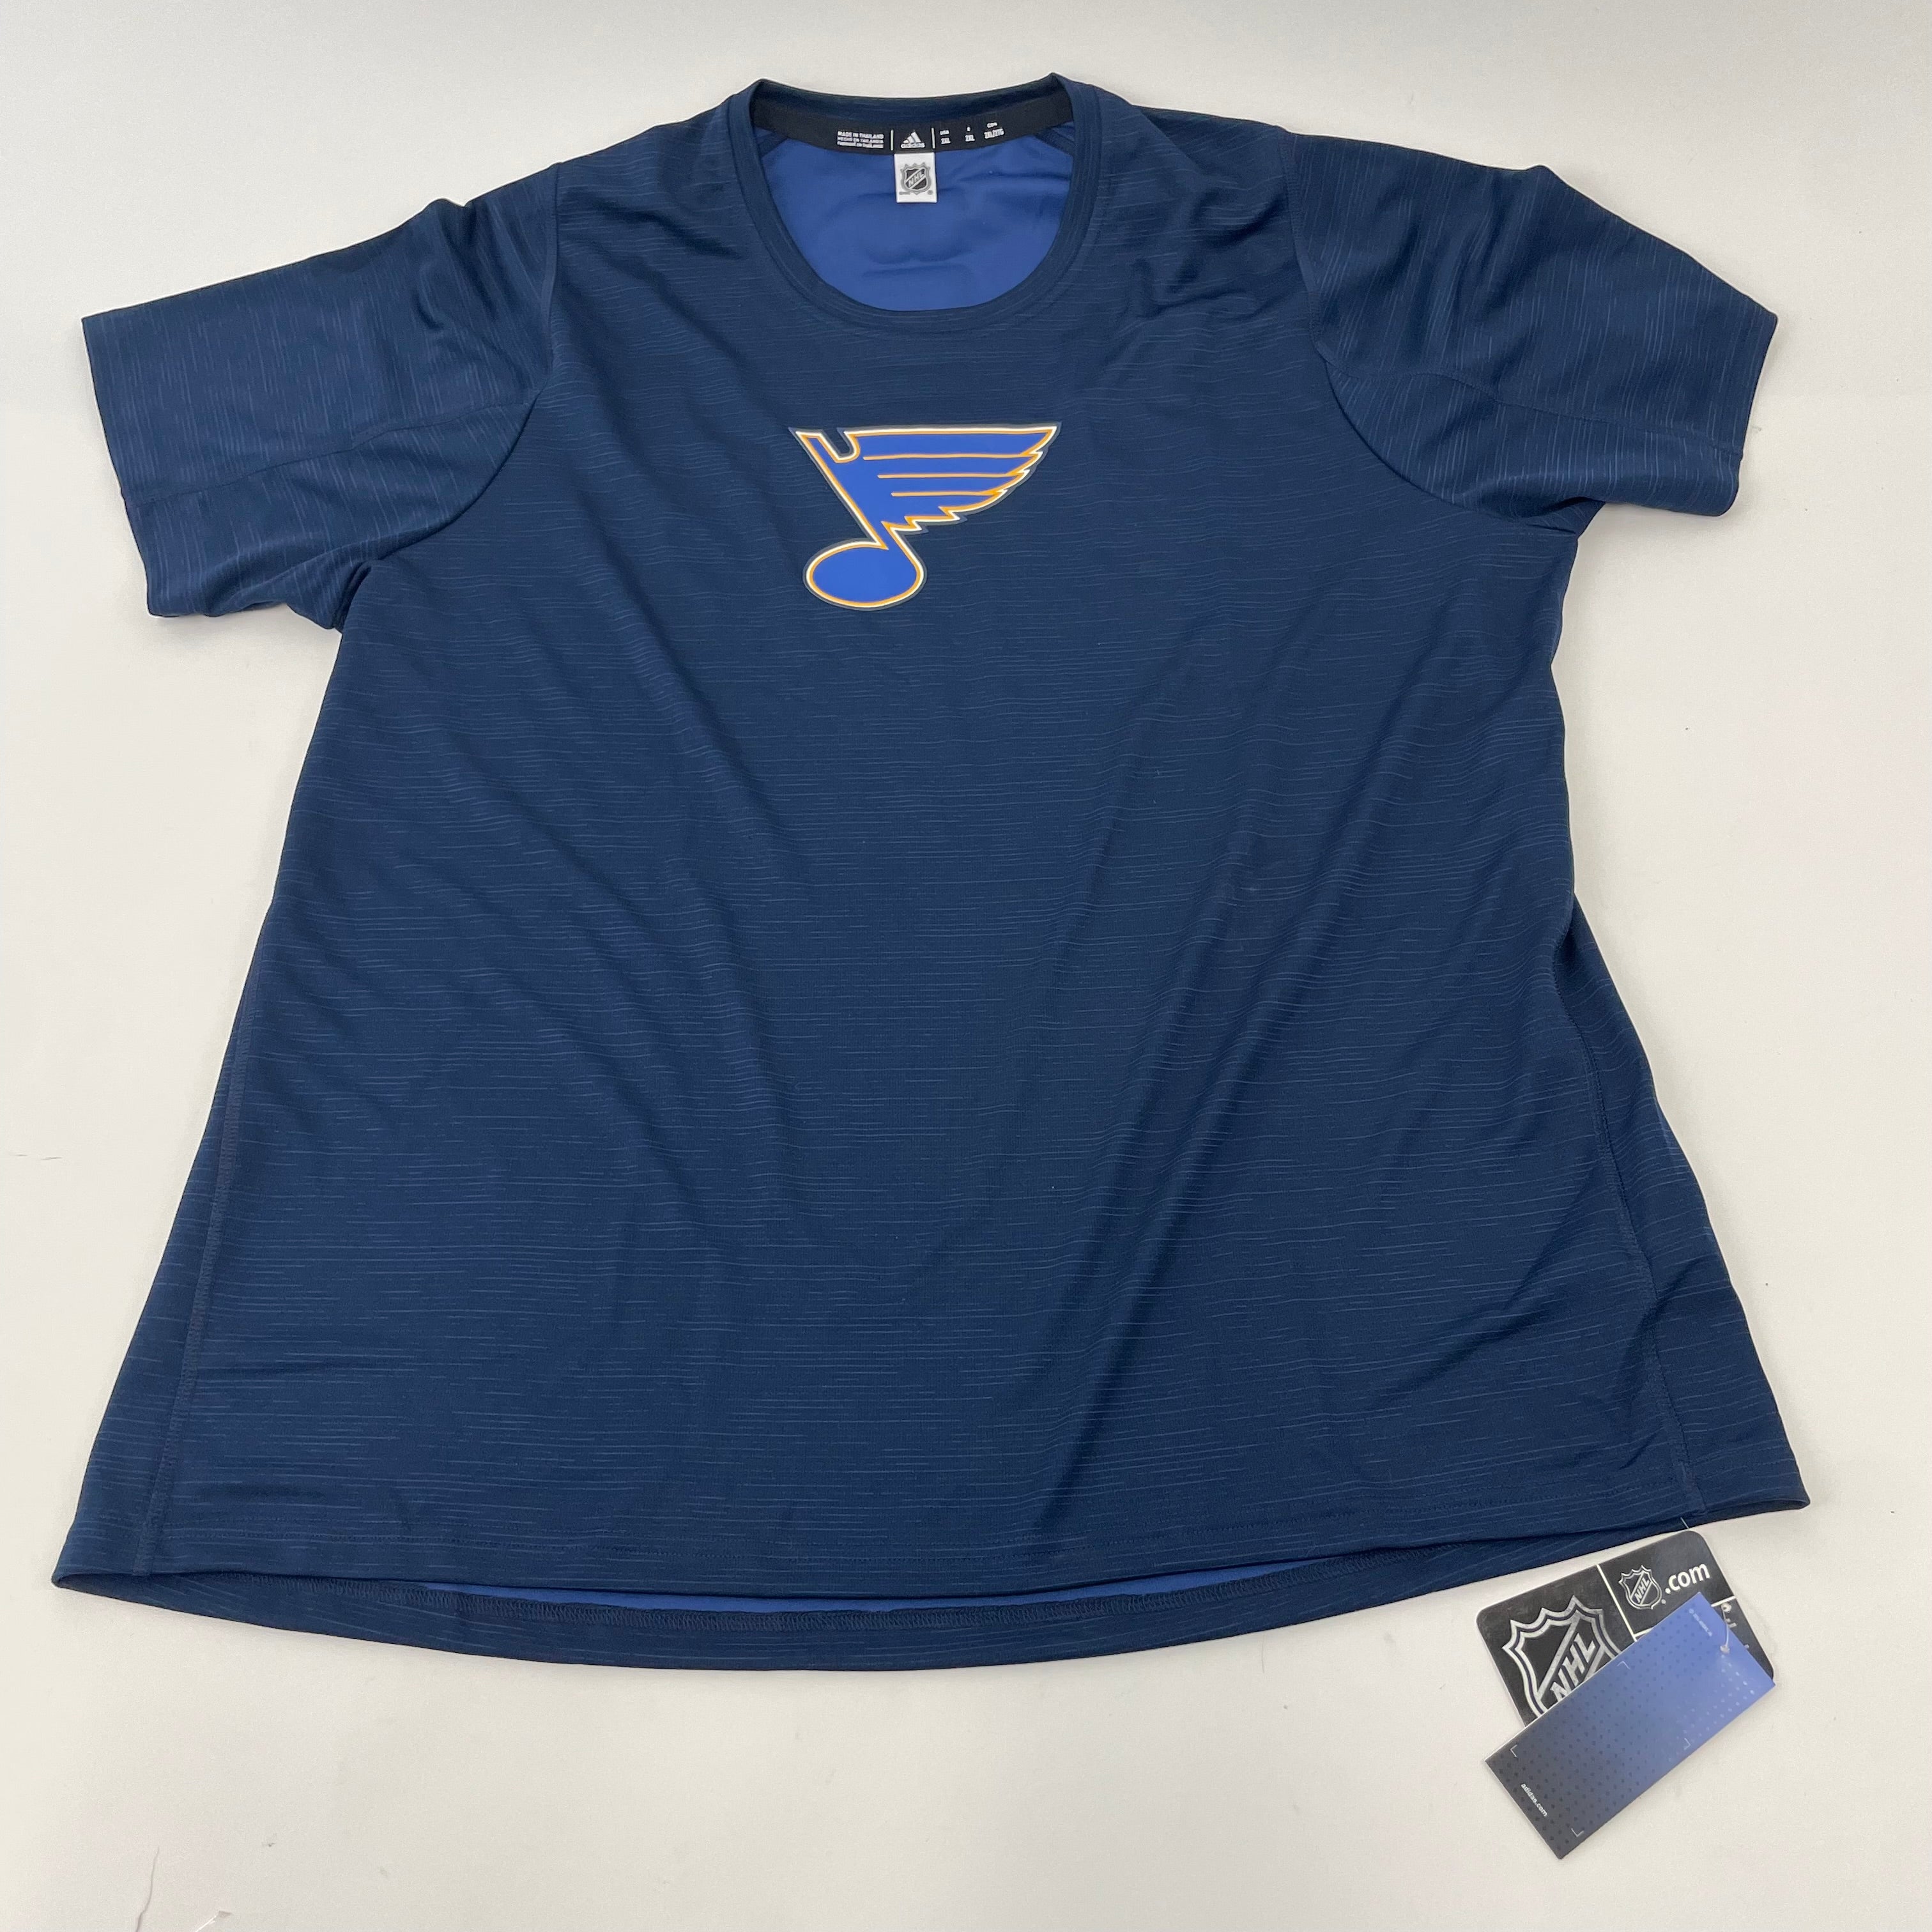 Player Issued - Navy Blue St. Louis Blues T-shirt, #X478